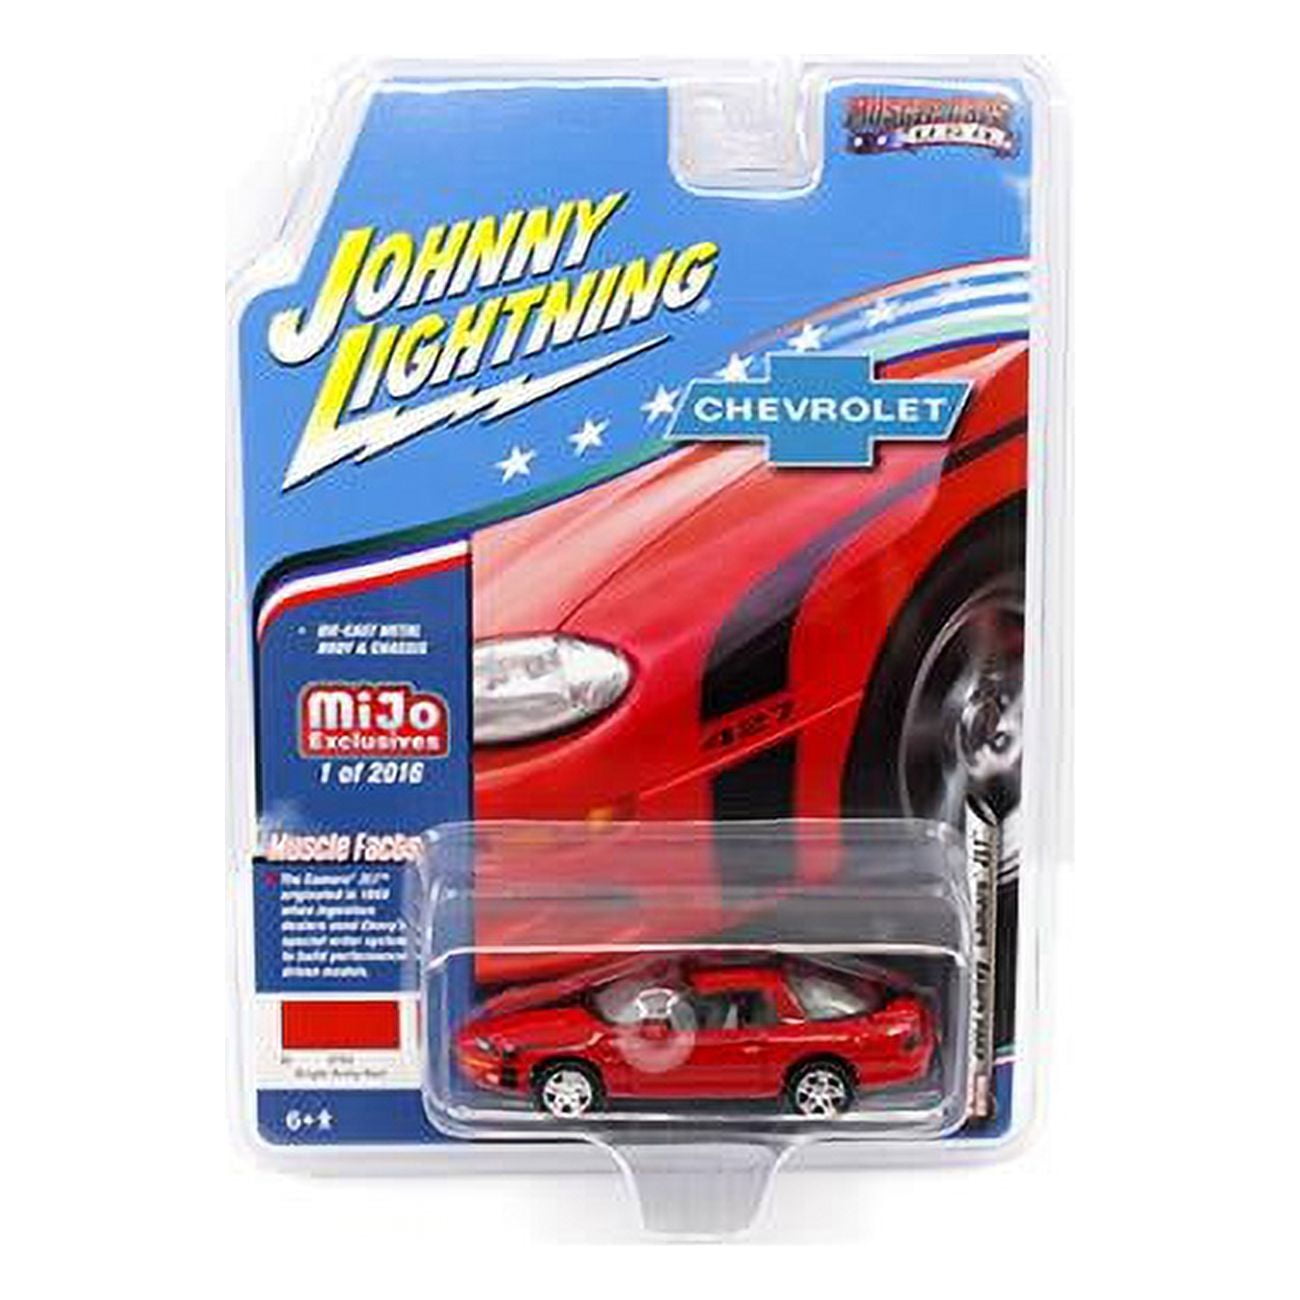 Jlcp7138 2002 Chevrolet Camaro Zl1 427 Muscle Cars Limited Edition To 2,016 Pieces Worldwide - Red